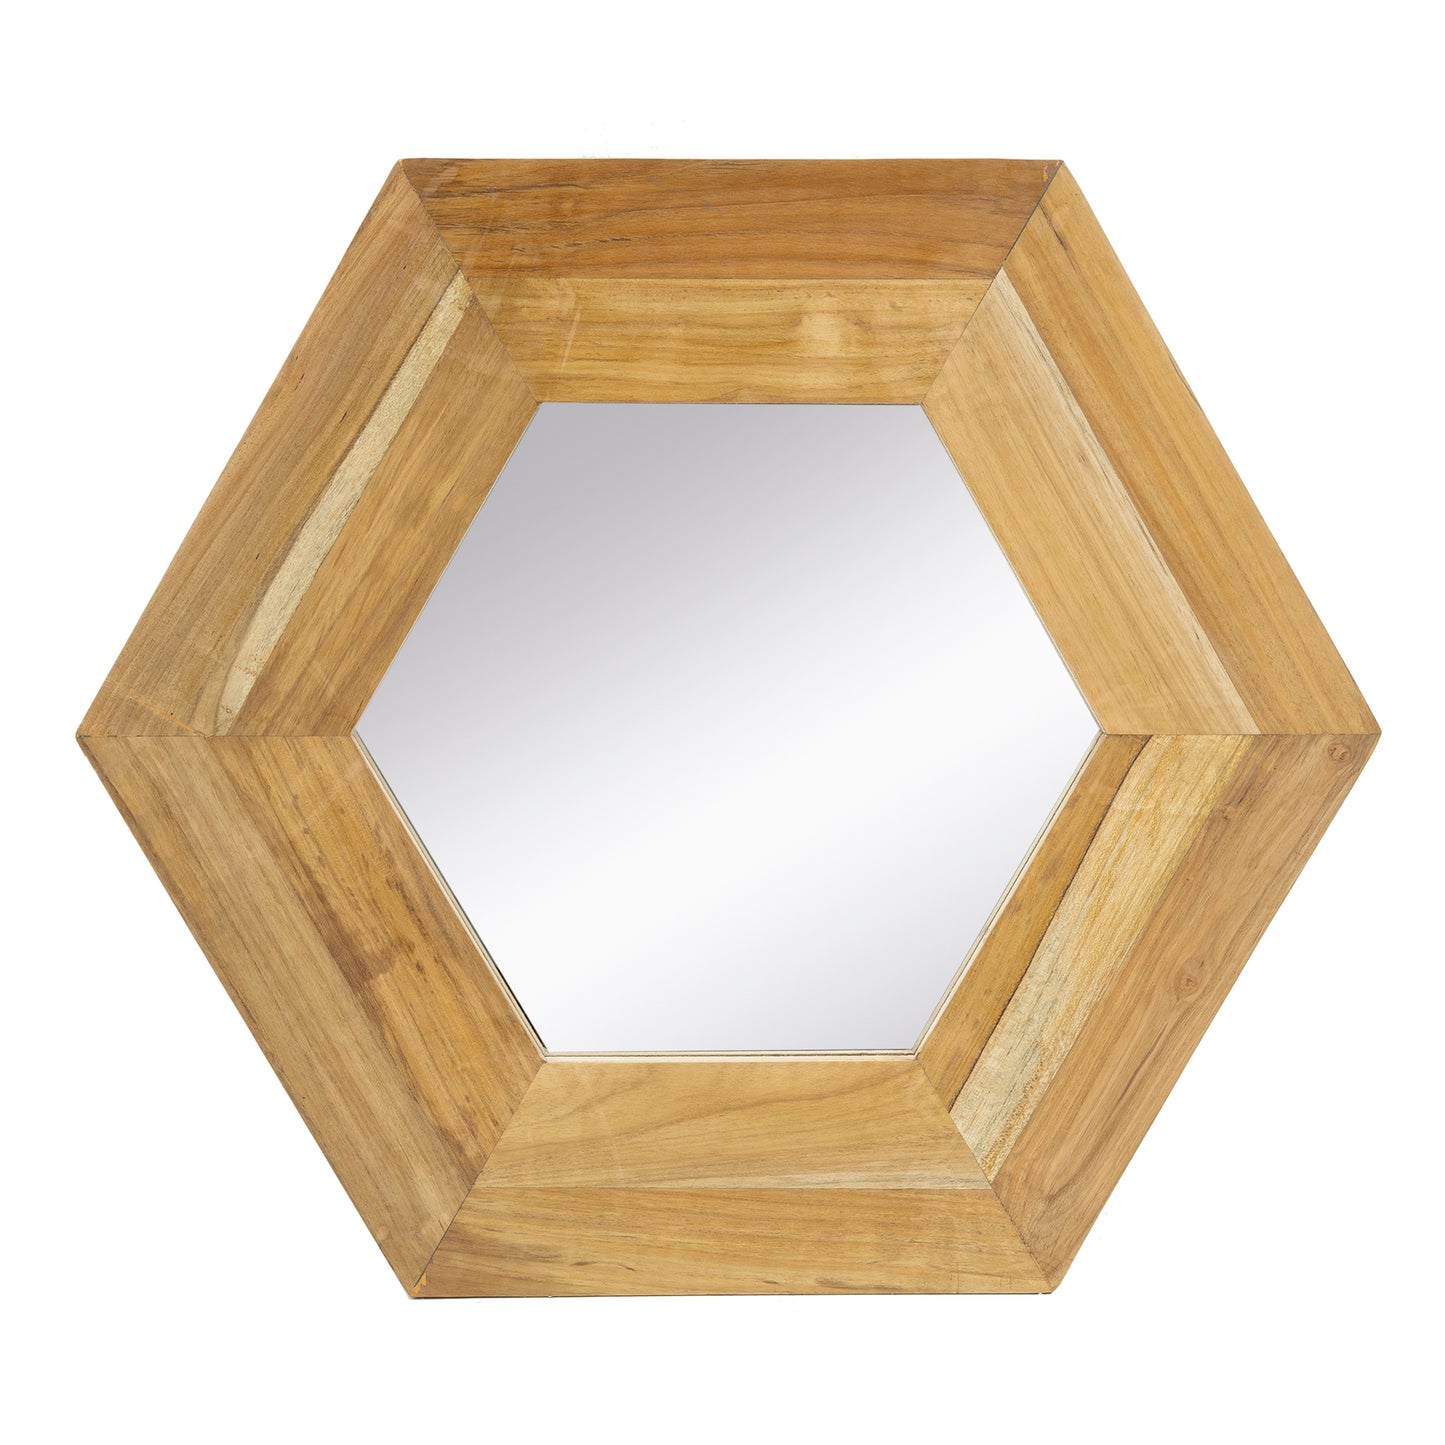 18.5" x 18.5" Hexagon Mirror with Natural Wood Frame